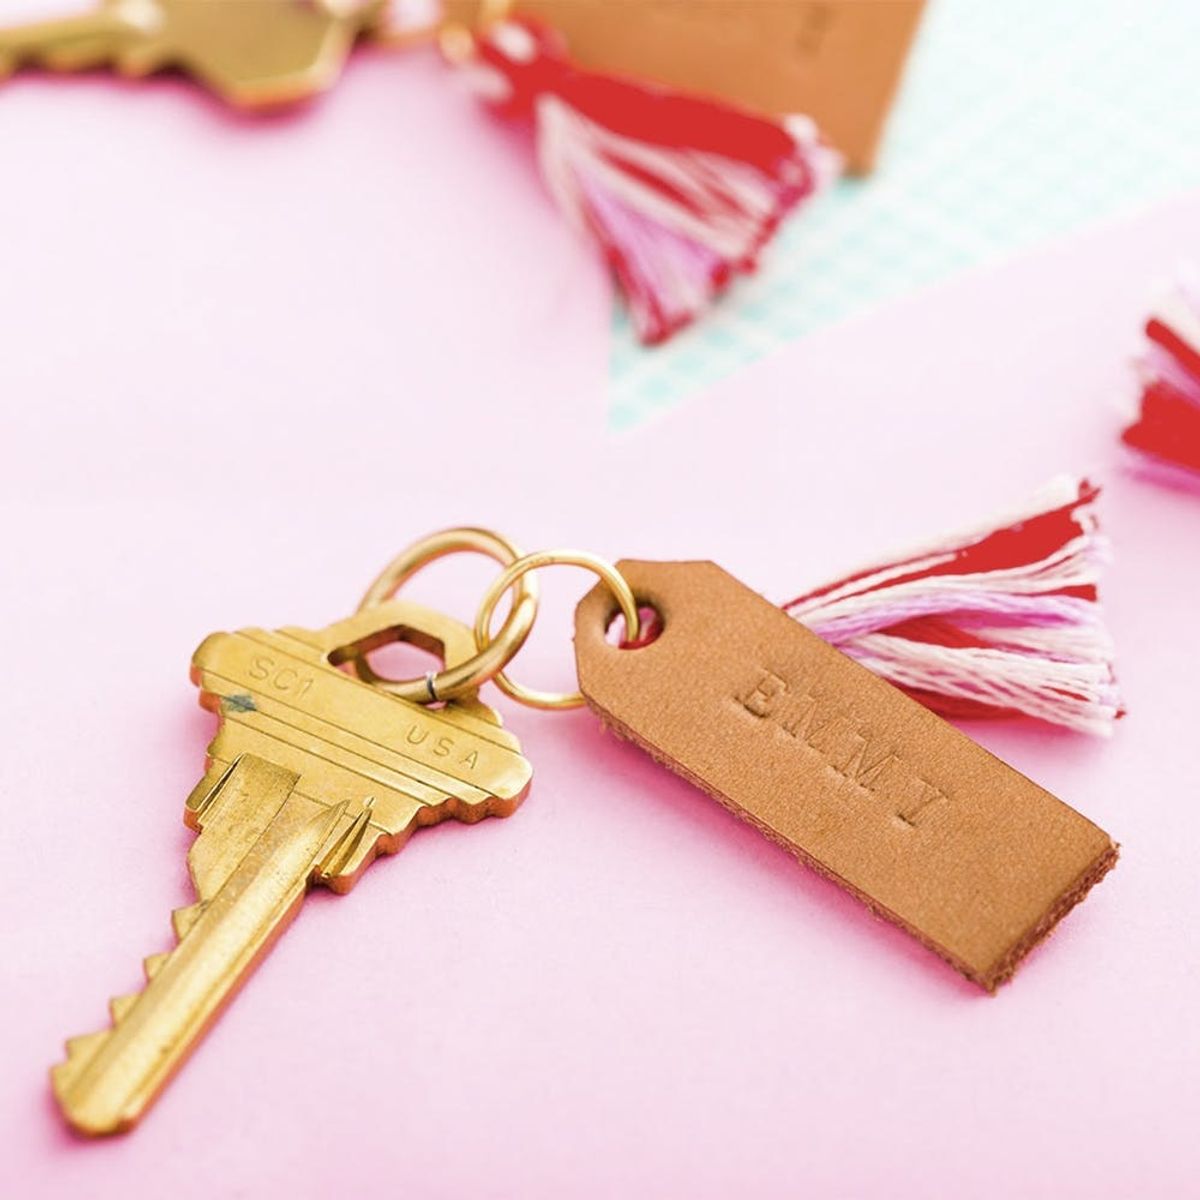 How to Make Leather Stamped Keychains in 5 Minutes